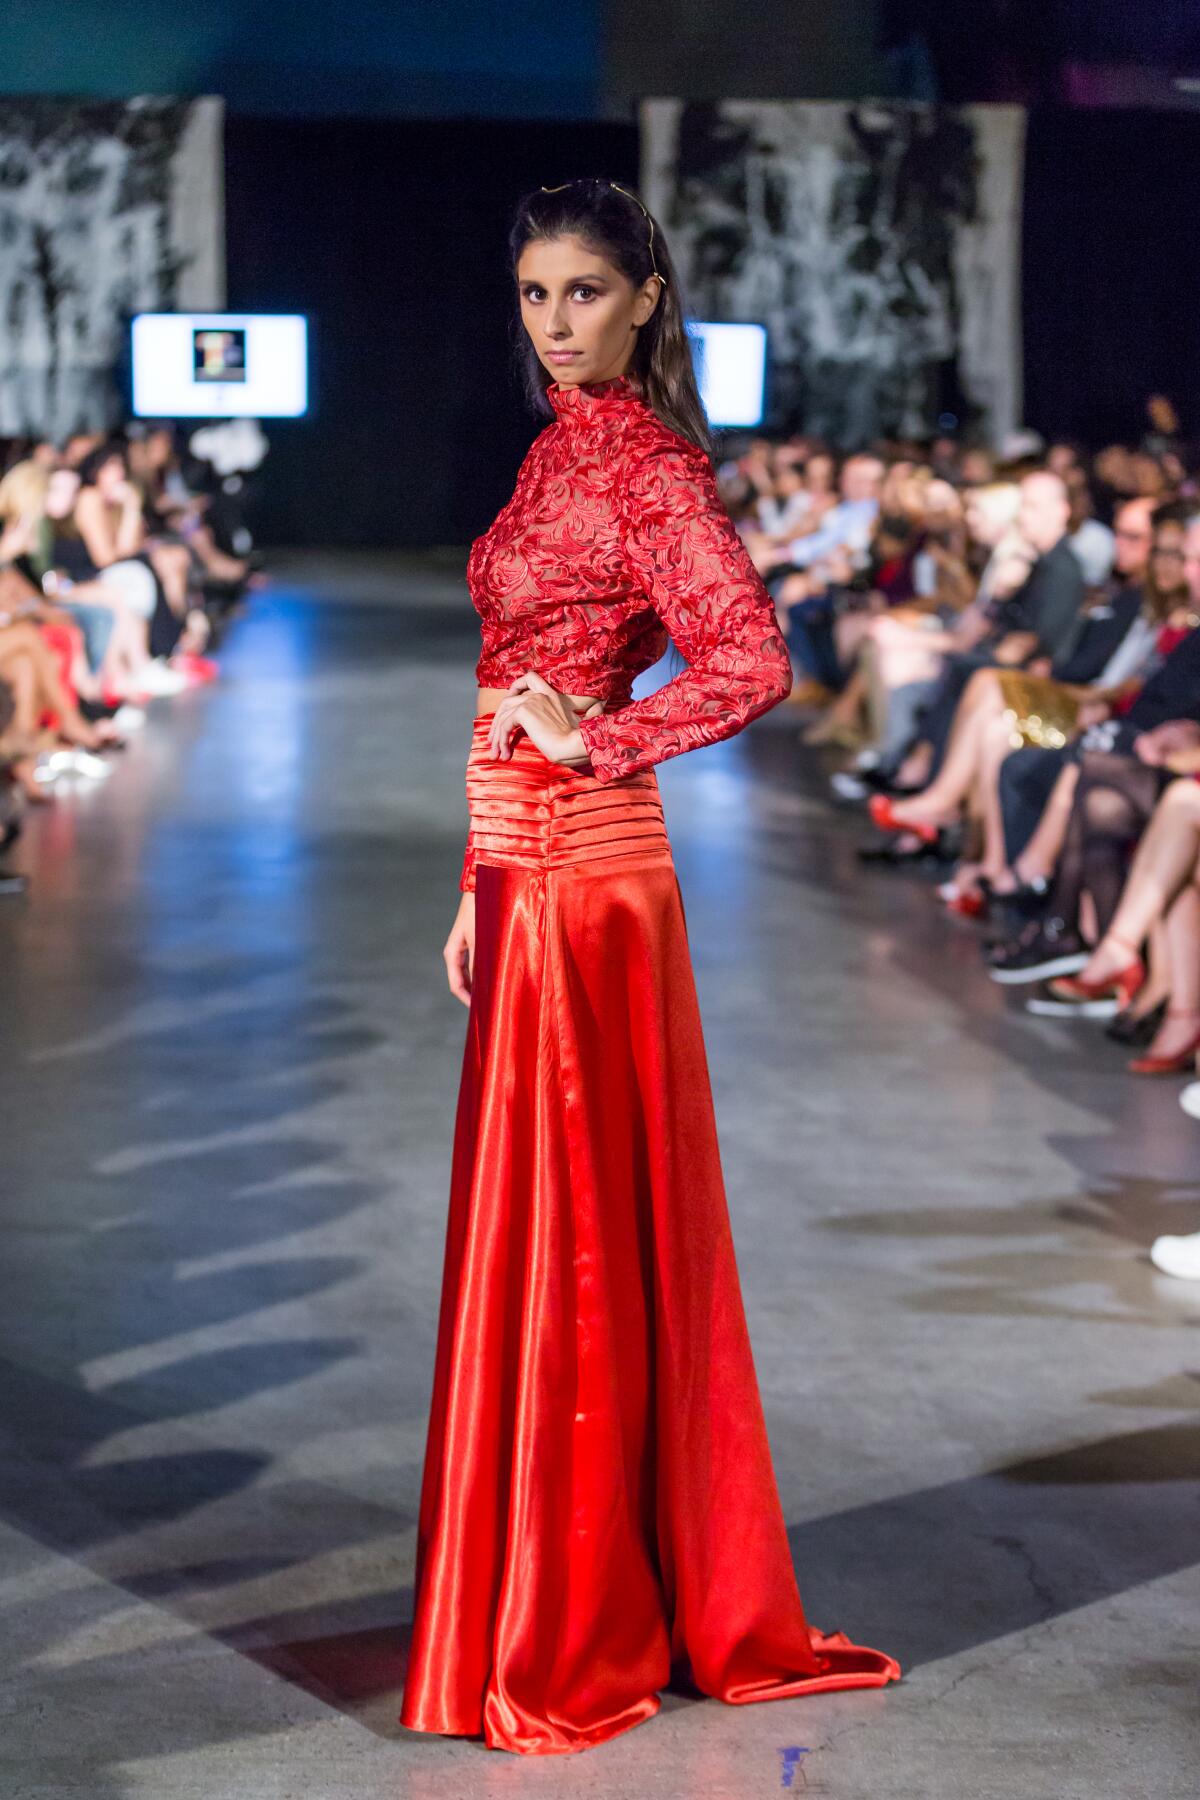 A model walks the runway at a previous Fashion Week San Diego event.